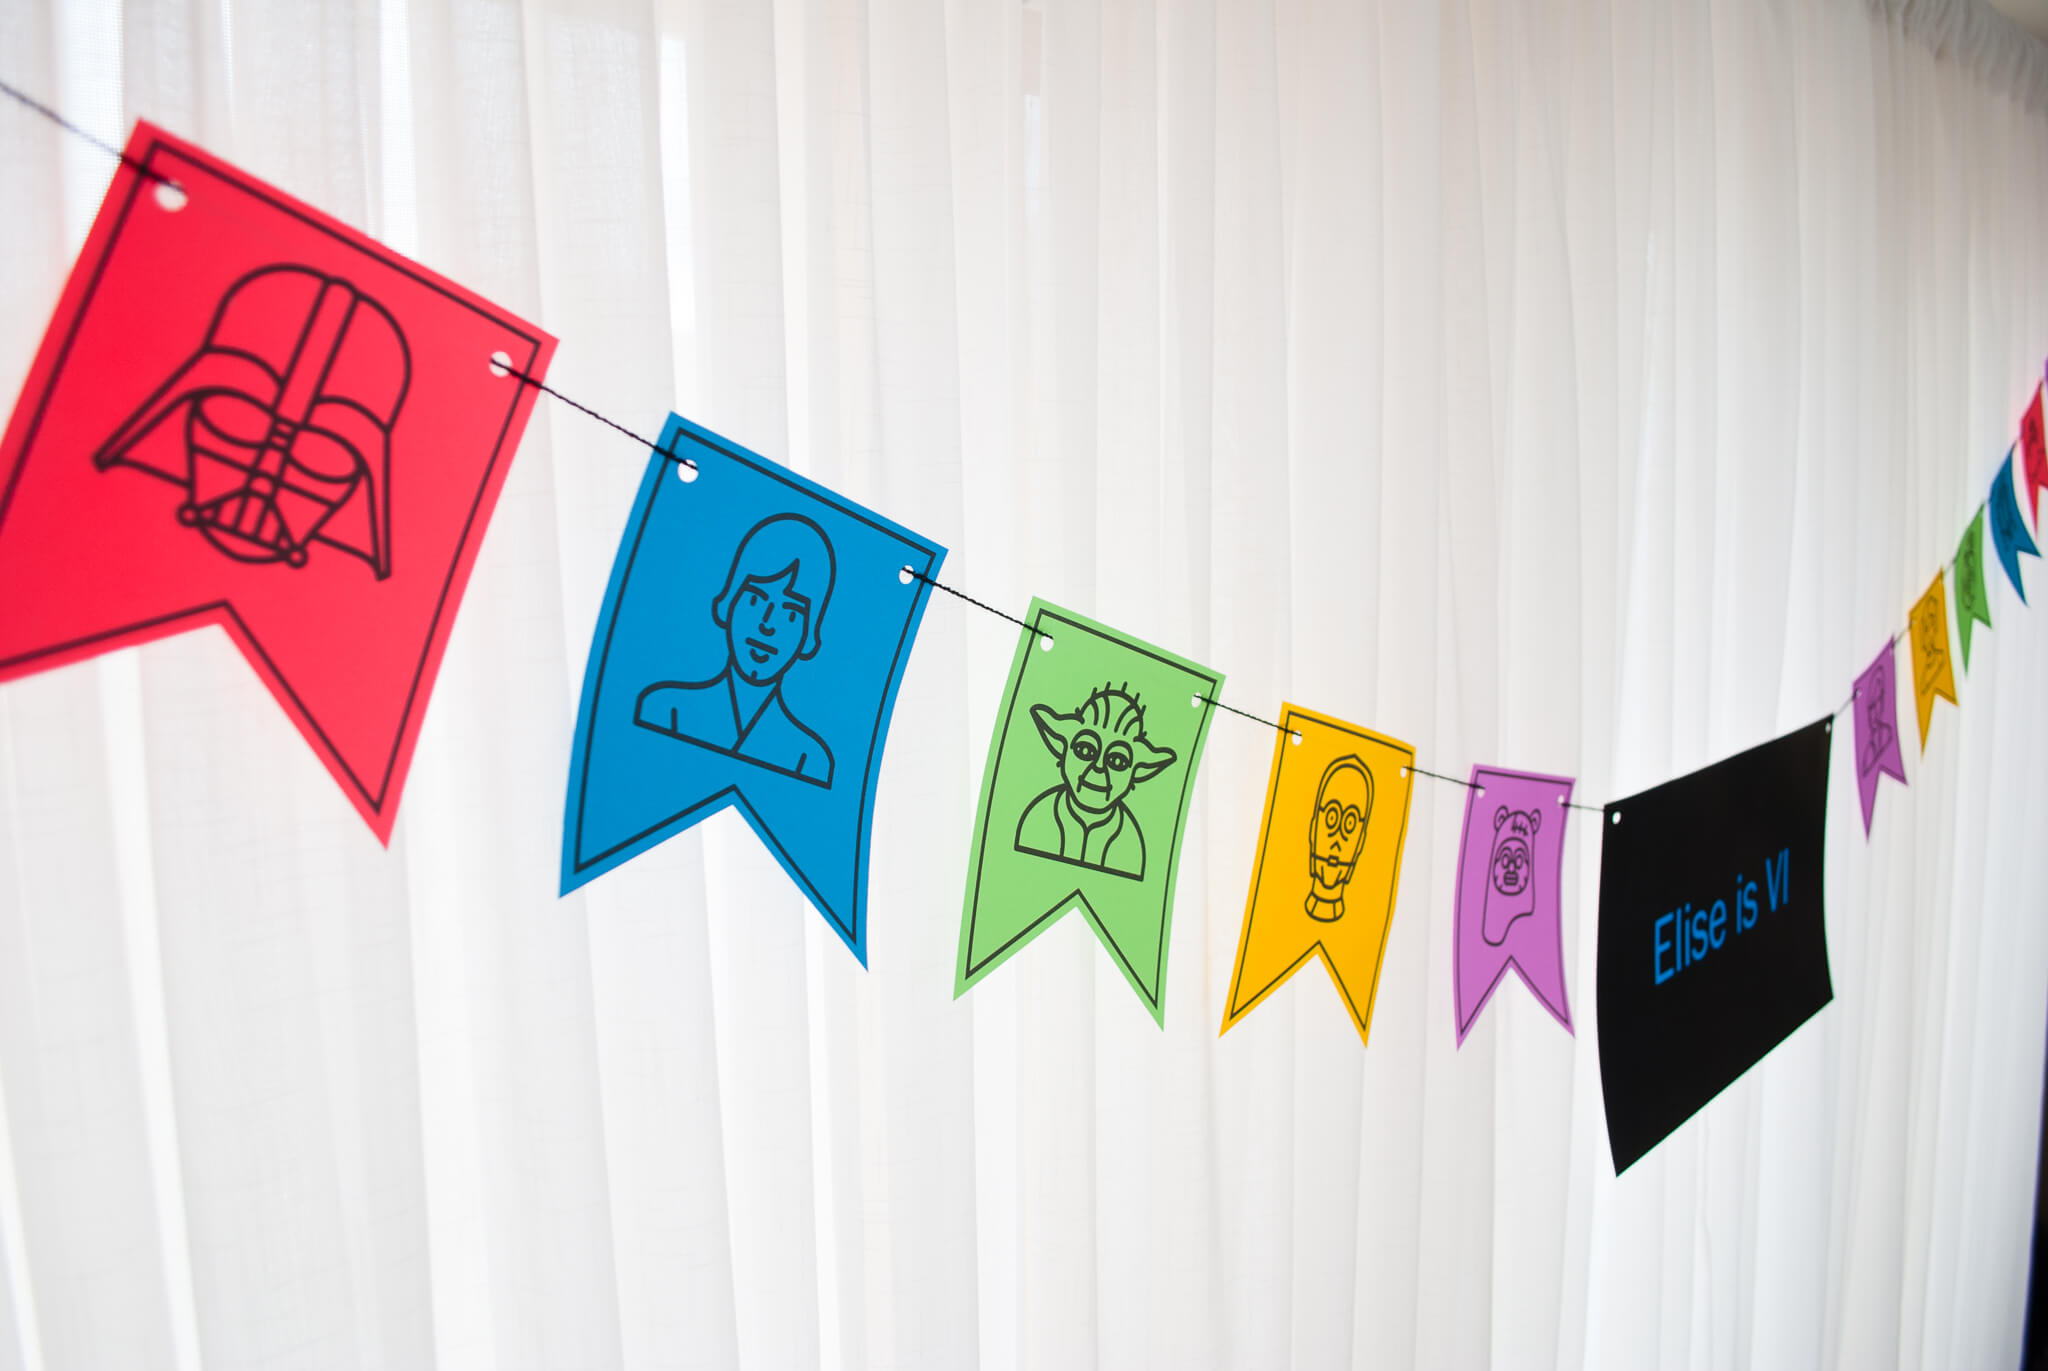 Star Wars Party Decorations - Printable Birthday Banner in For Homemade Banner Template